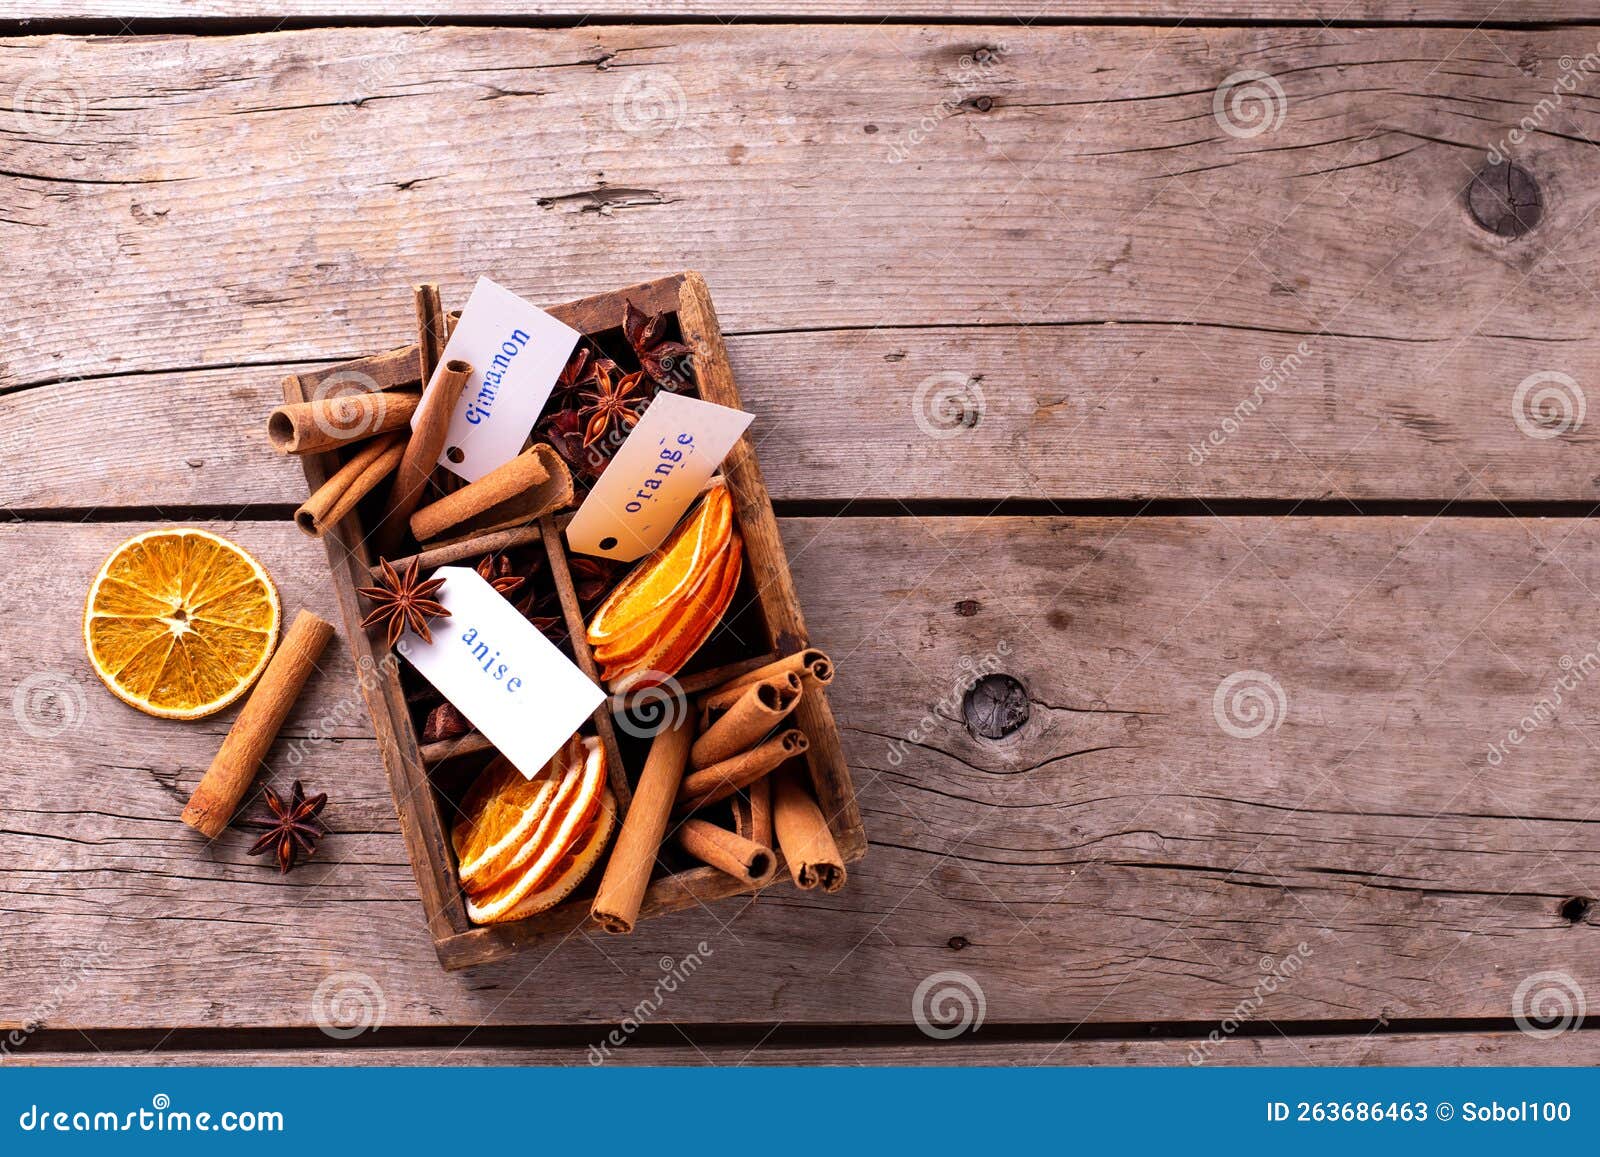 vintage box with  different spices - cinnamone, slices of dried orange, anise on vintage wooden  background.